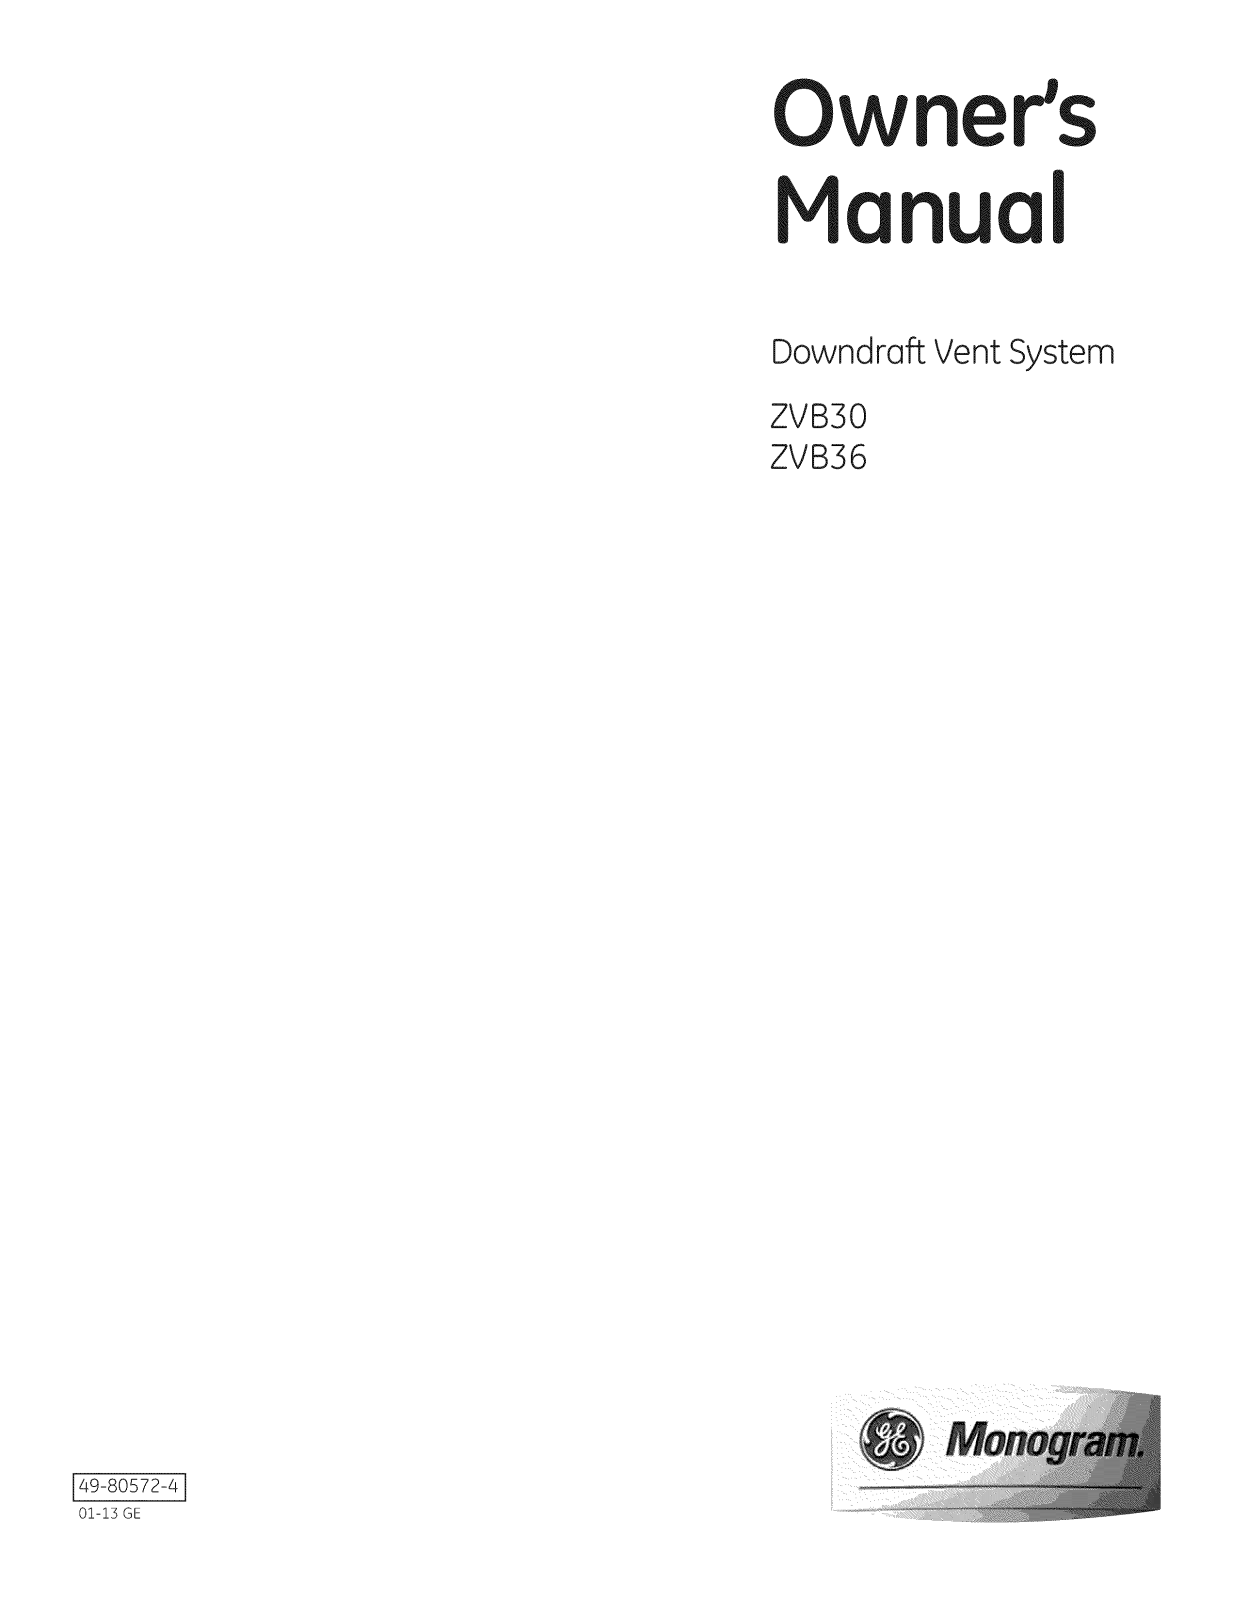 GE ZVB36ST4SS, ZVB36ST3SS, ZVB36ST2SS, ZVB36ST1SS, ZVB30ST4SS Owner’s Manual